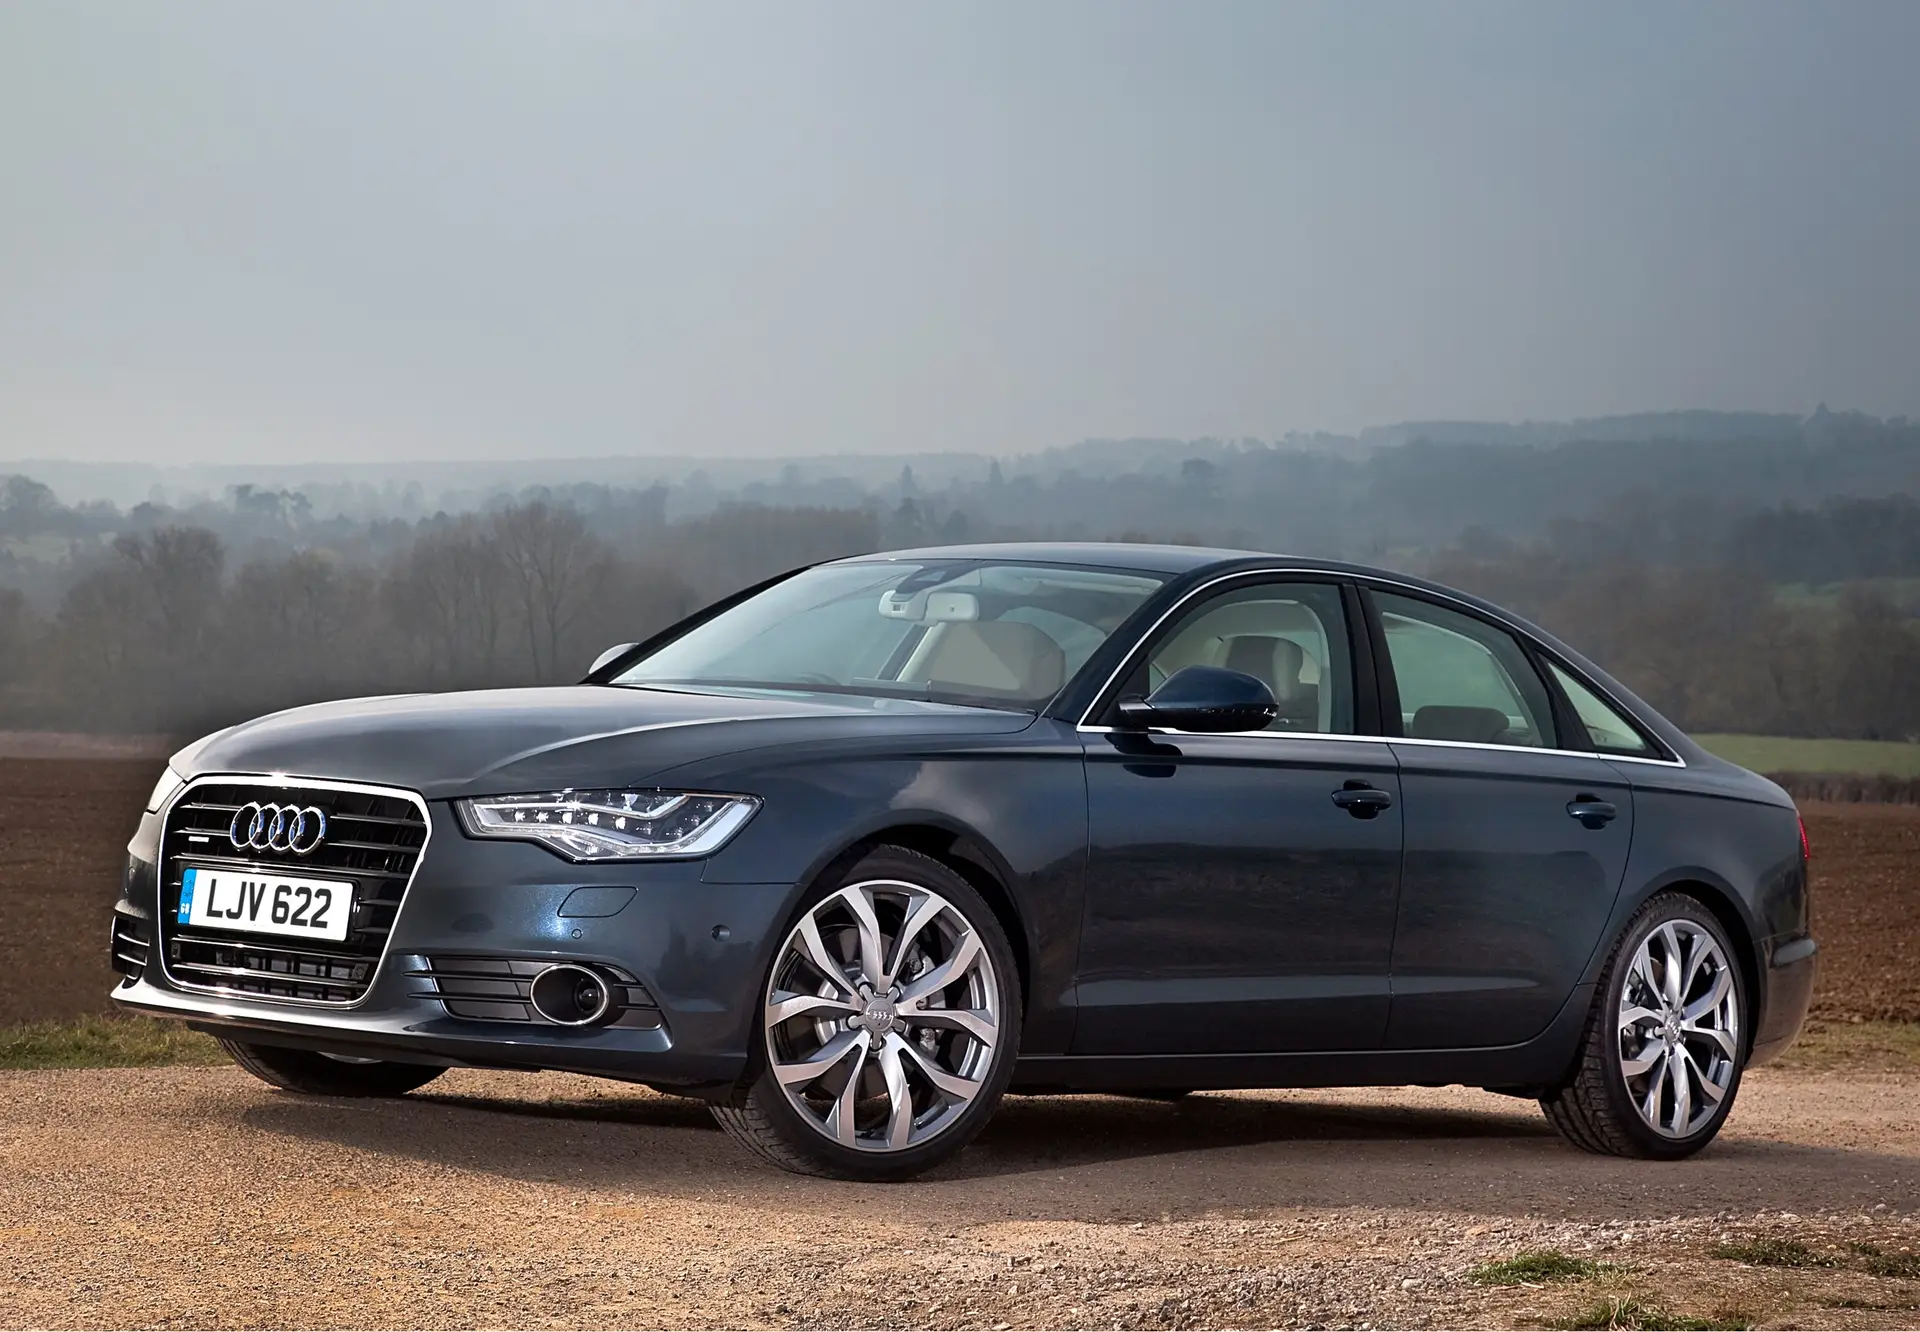 Used Audi A6 (2011-2018) Review: Exterior front three quarter photo of the Audi A6